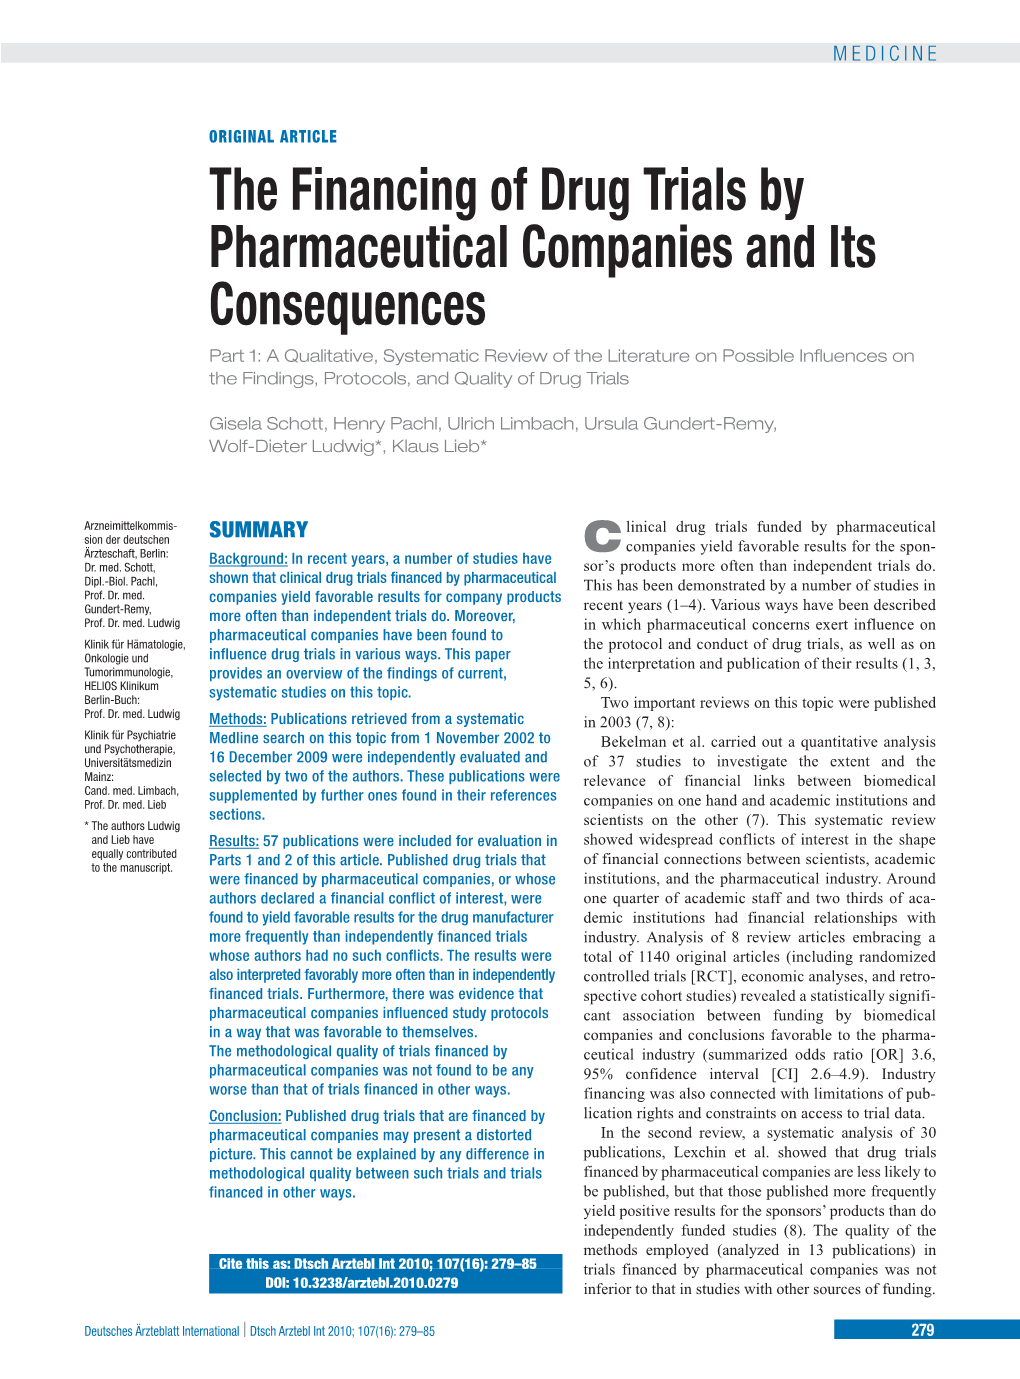 The Financing of Drug Trials by Pharmaceutical Companies and Its